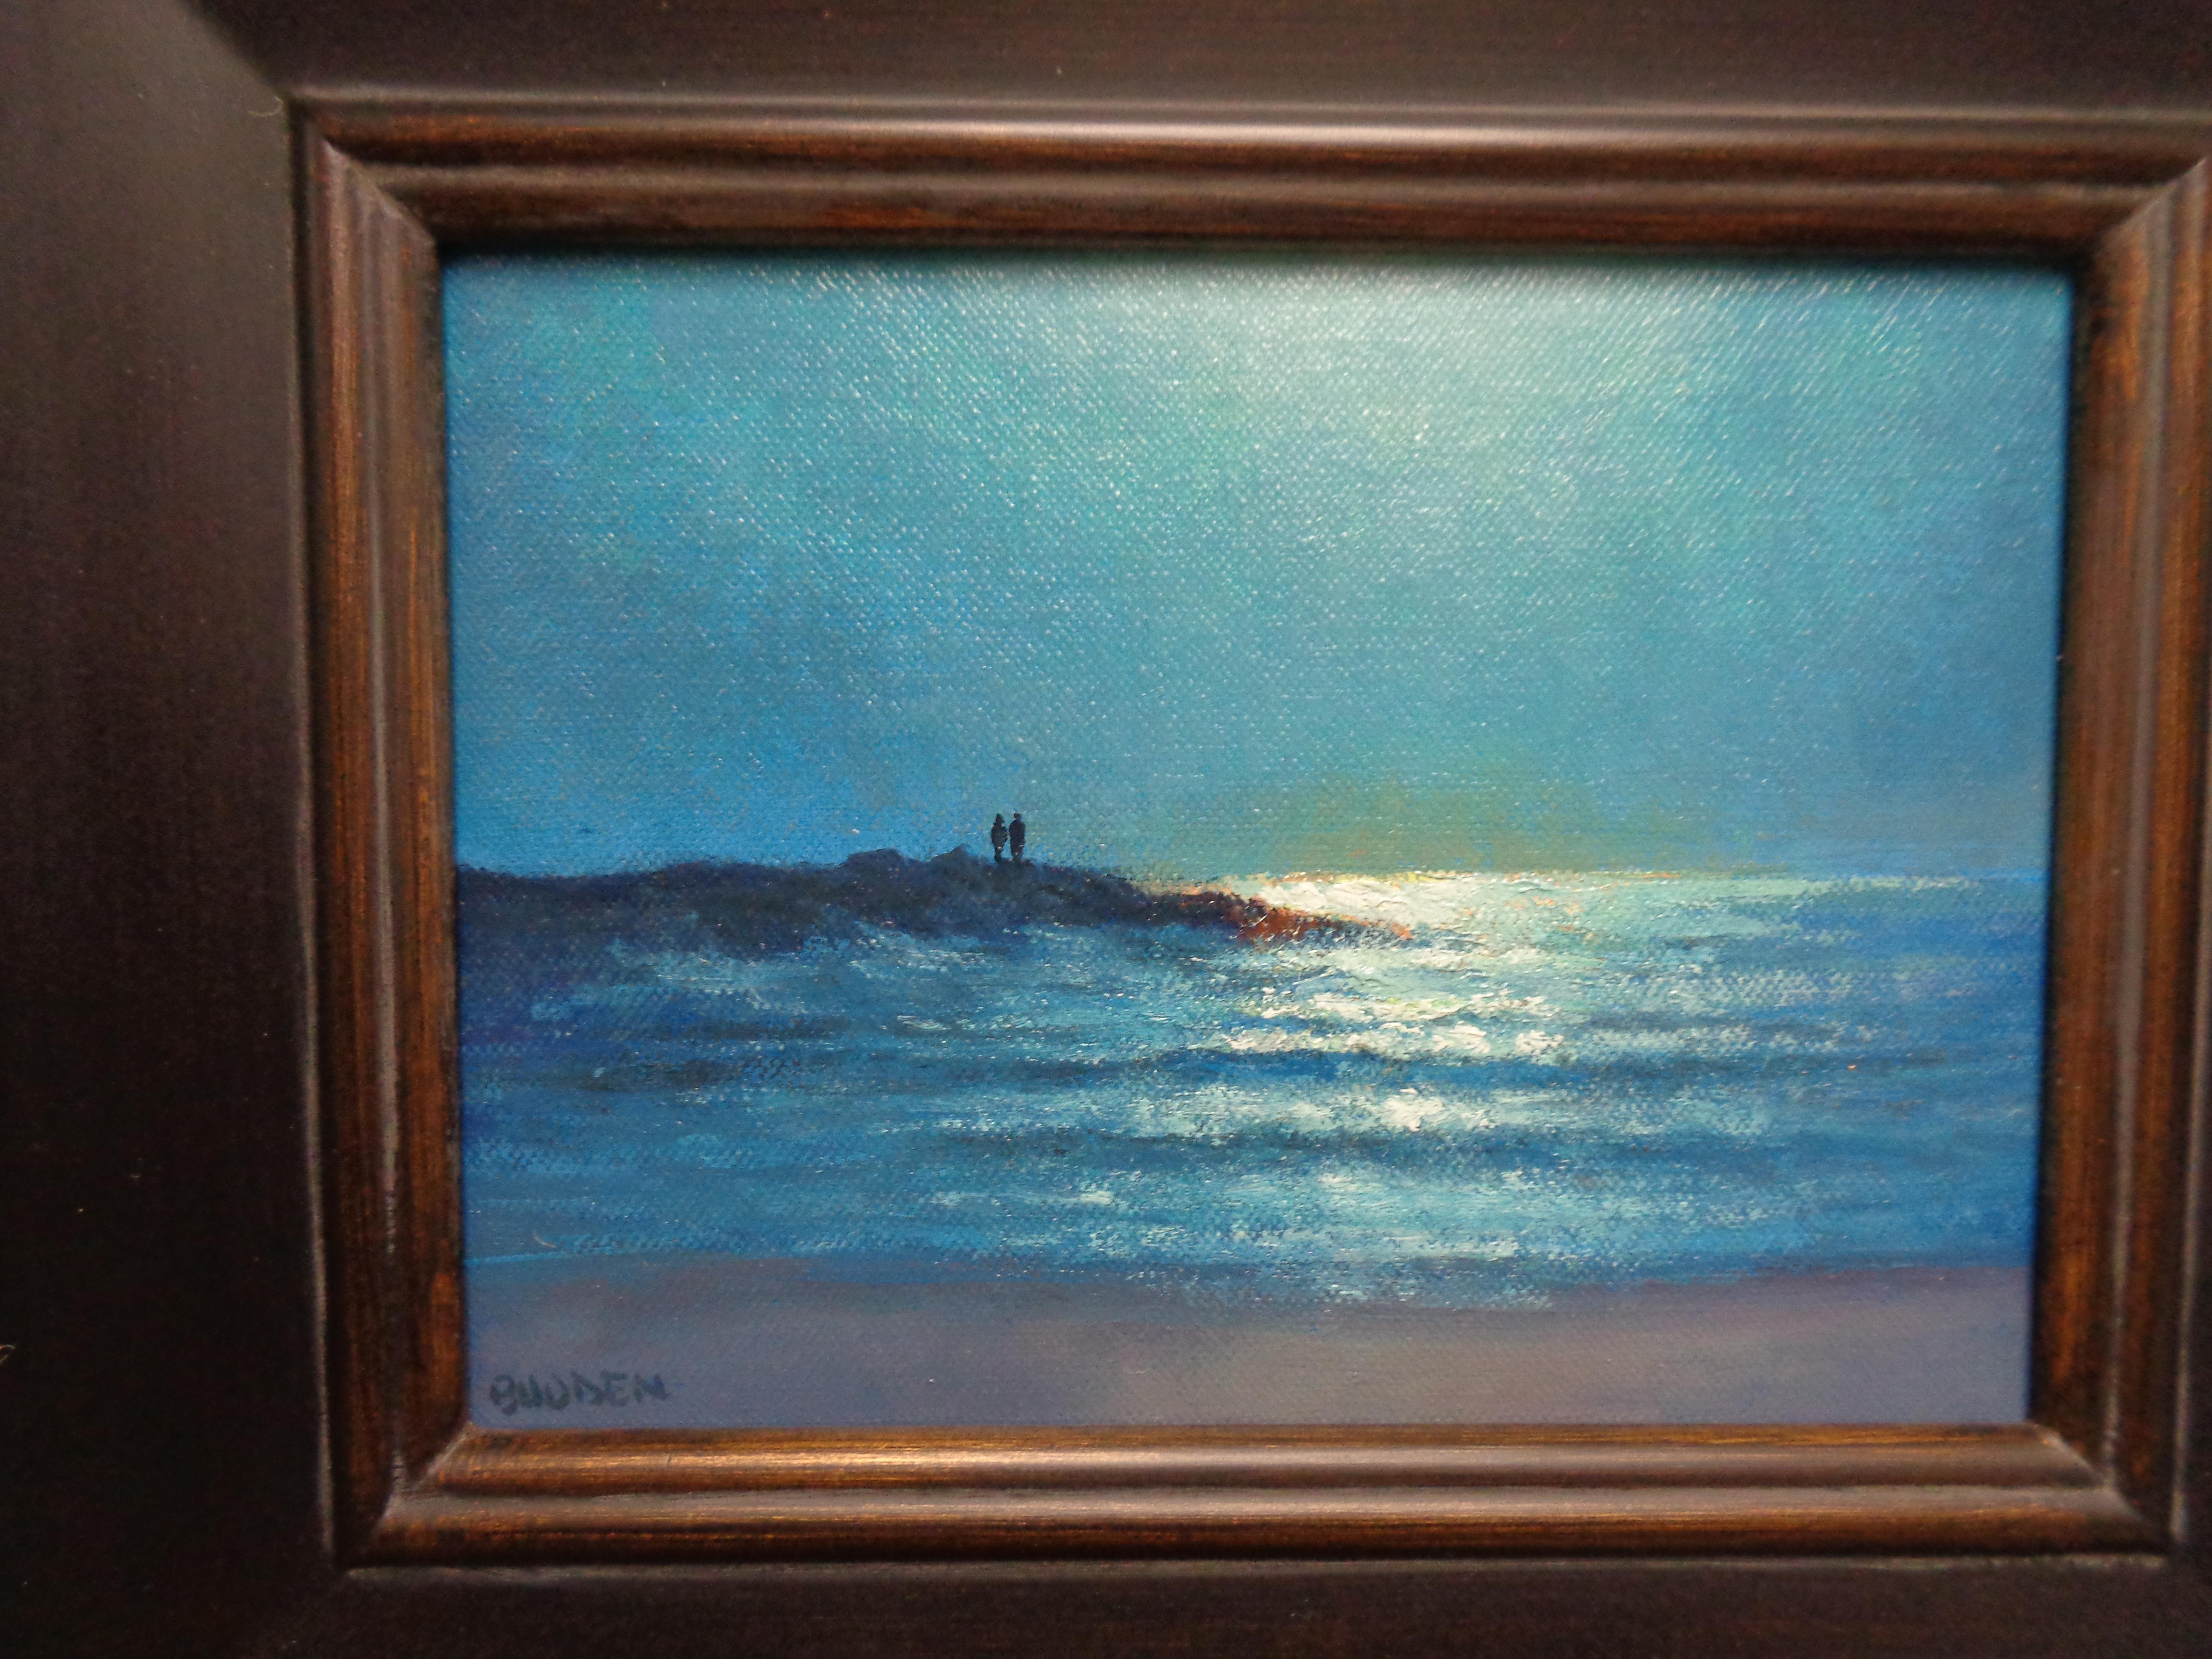 Impressionistic Seascape Ocean Painting Michael Budden Moon Light Jetty 1